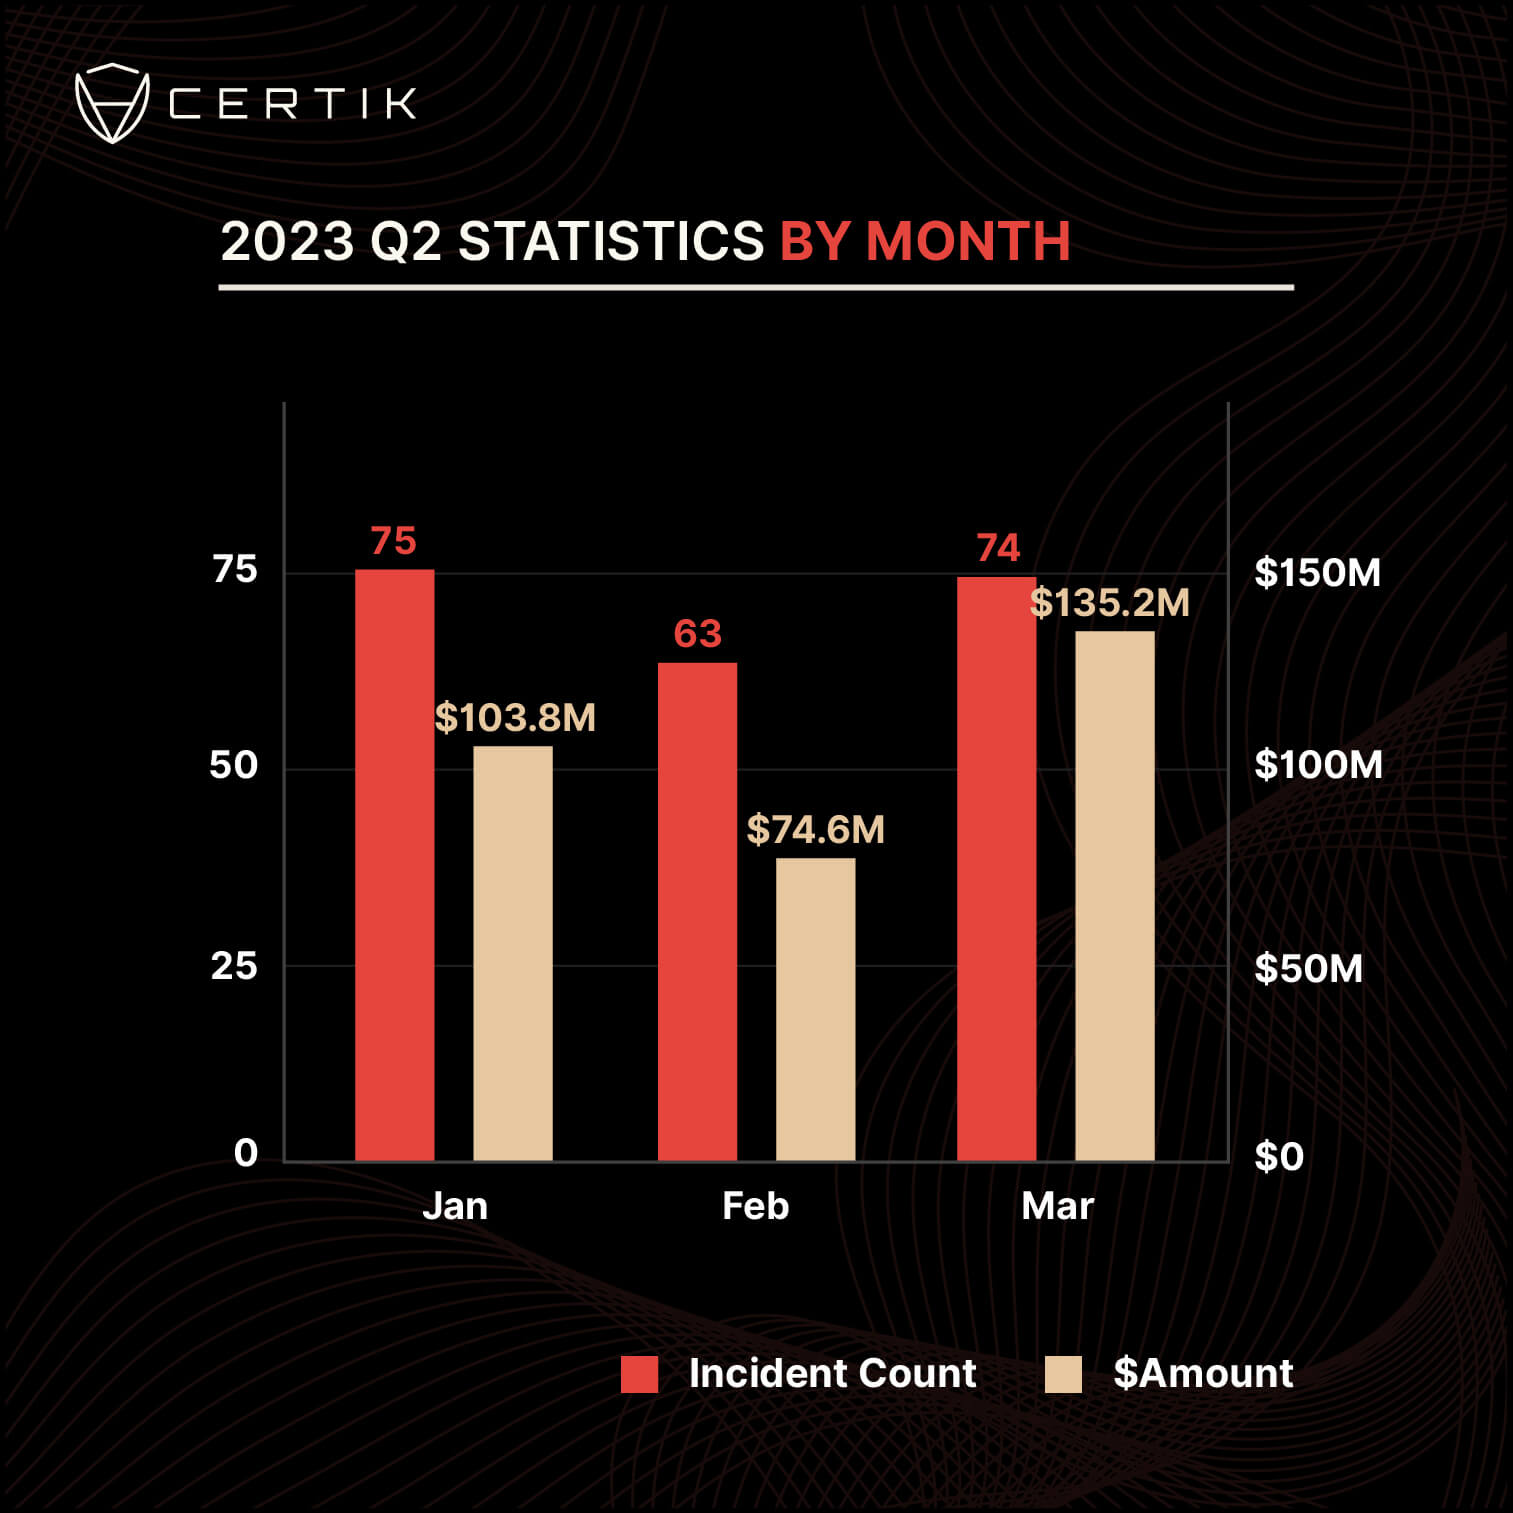 Web3 protocols saw decline in in security-related losses in Q2, but exit scams were on the rise